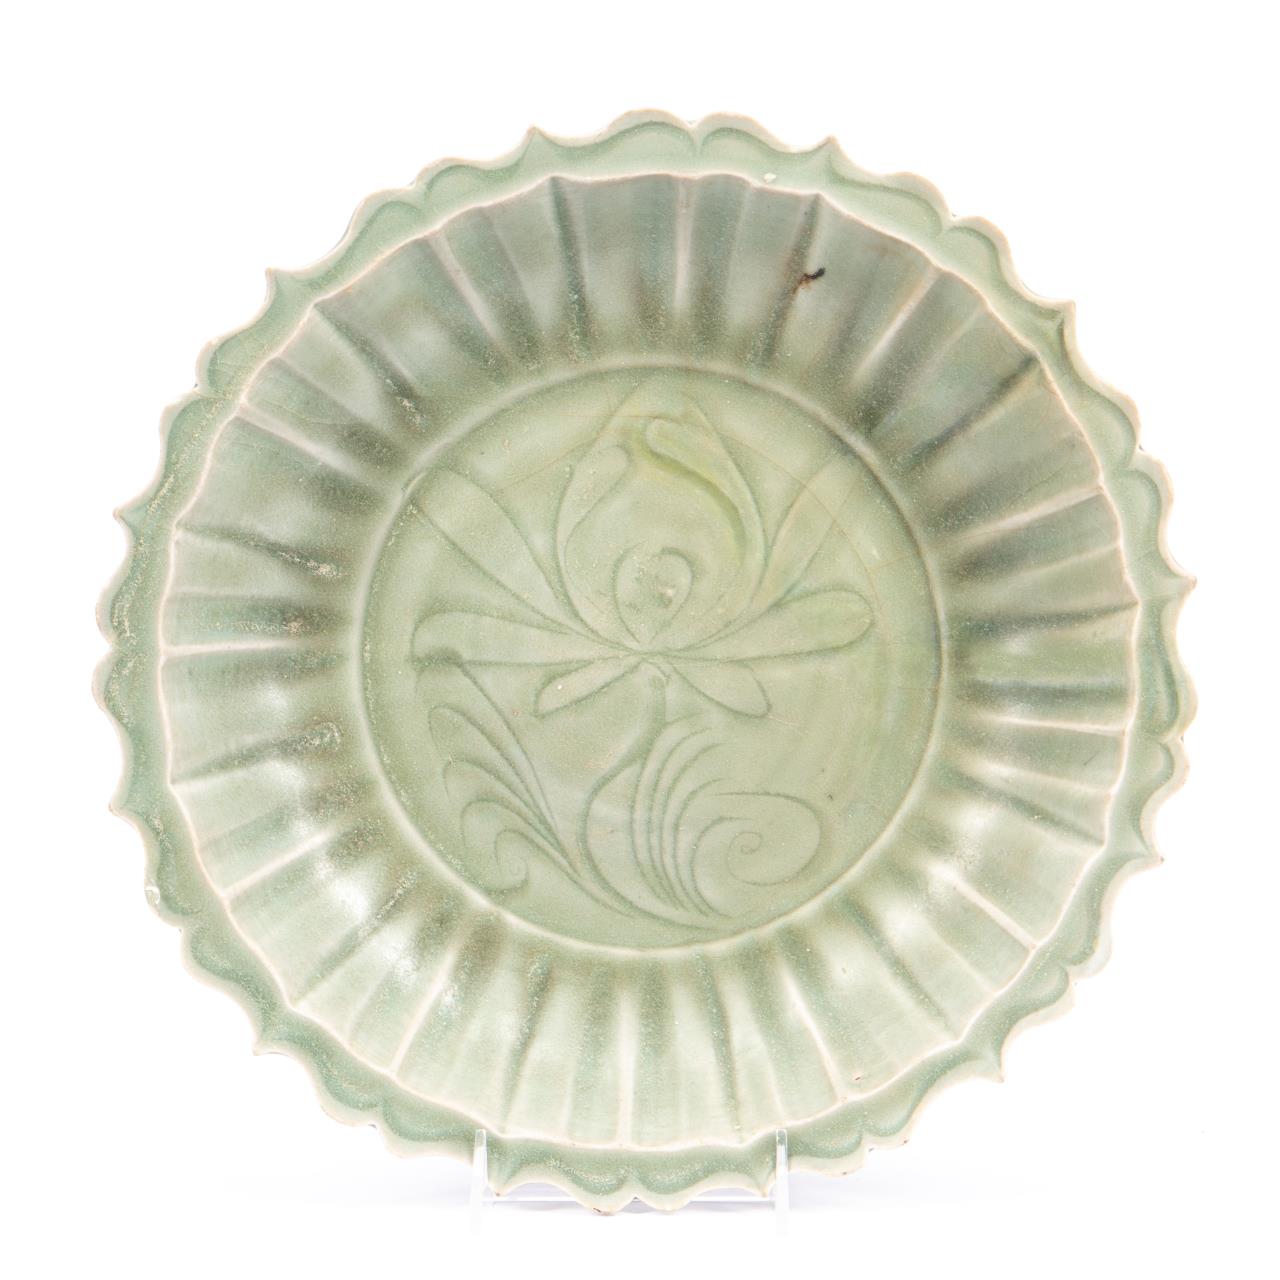 CHINESE CELADON GLAZED FLORAL SHALLOW